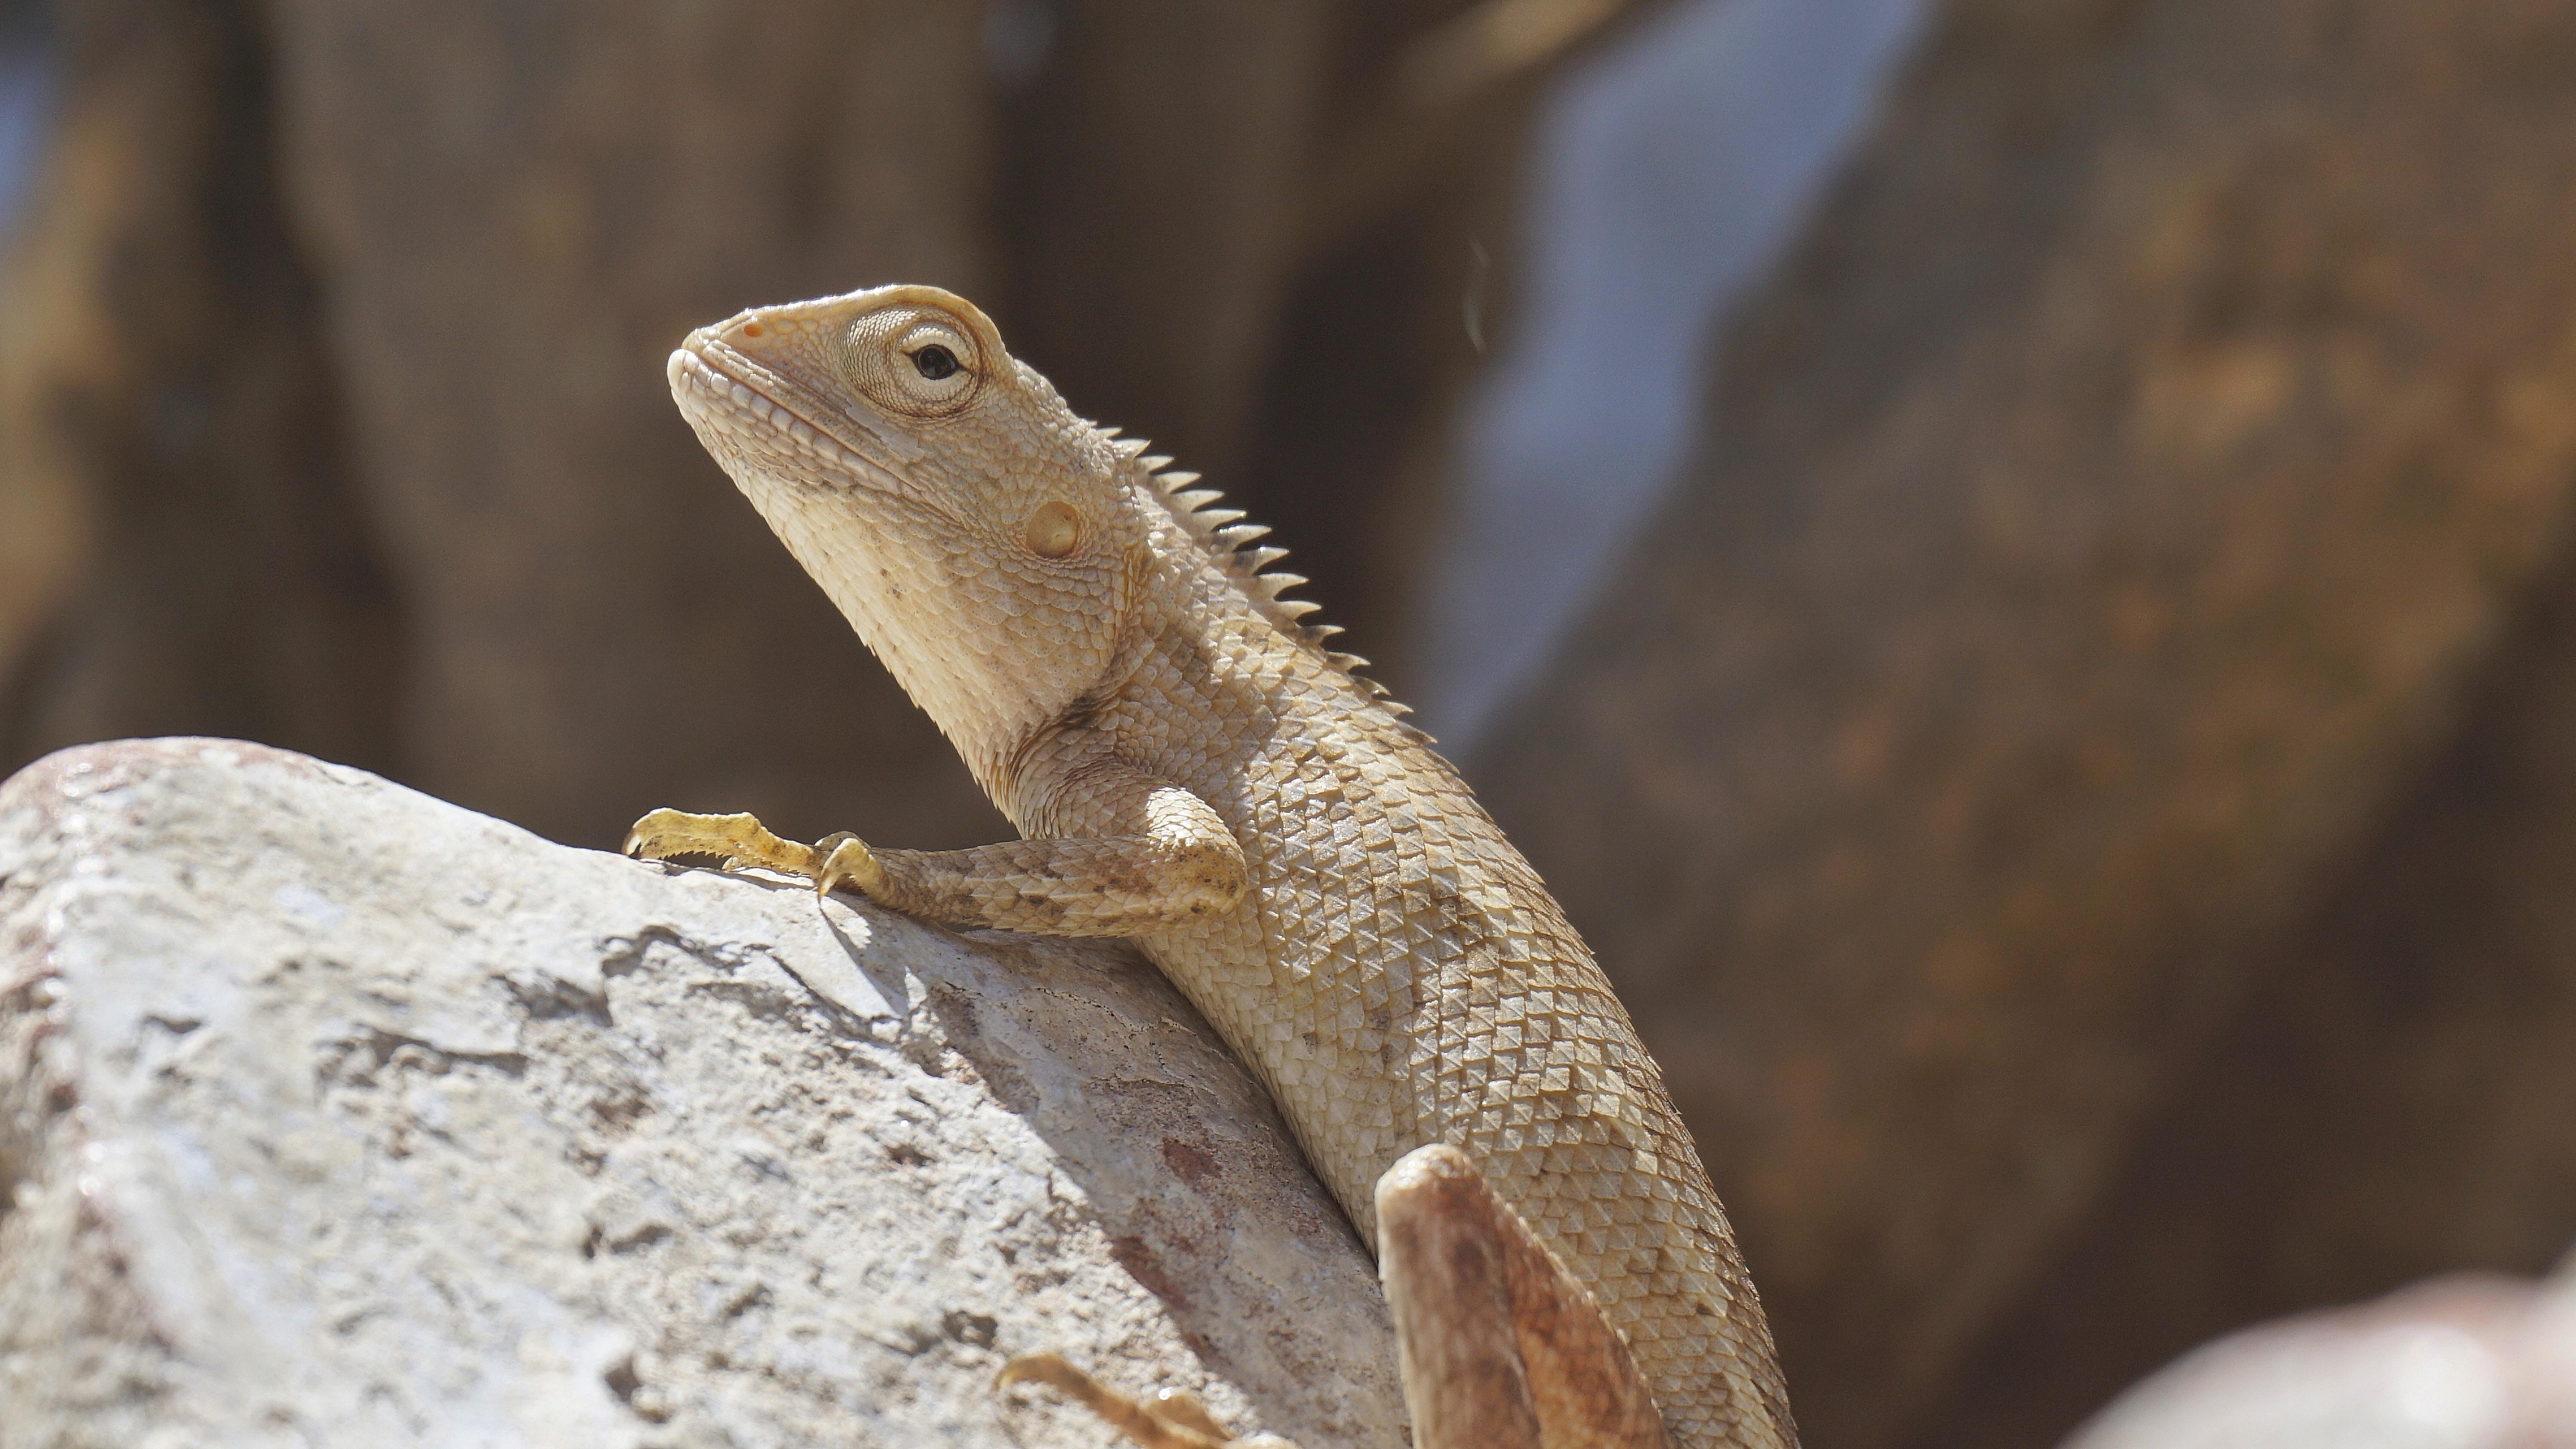 are bearded dragons asexual